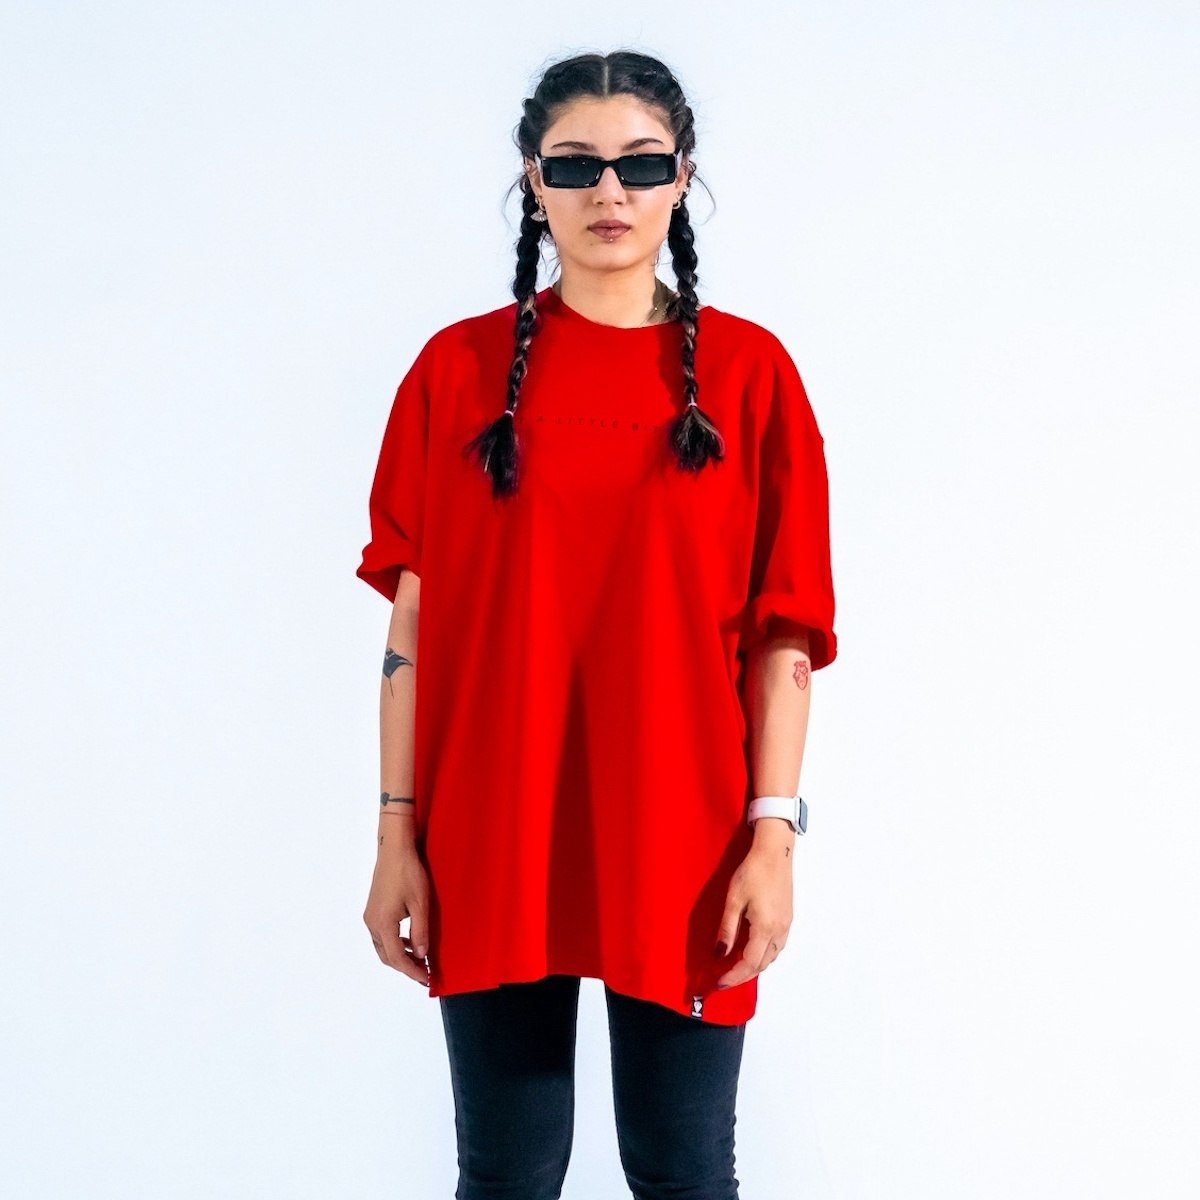 Unisex Text Printed Oversize Red T-shirt - 2